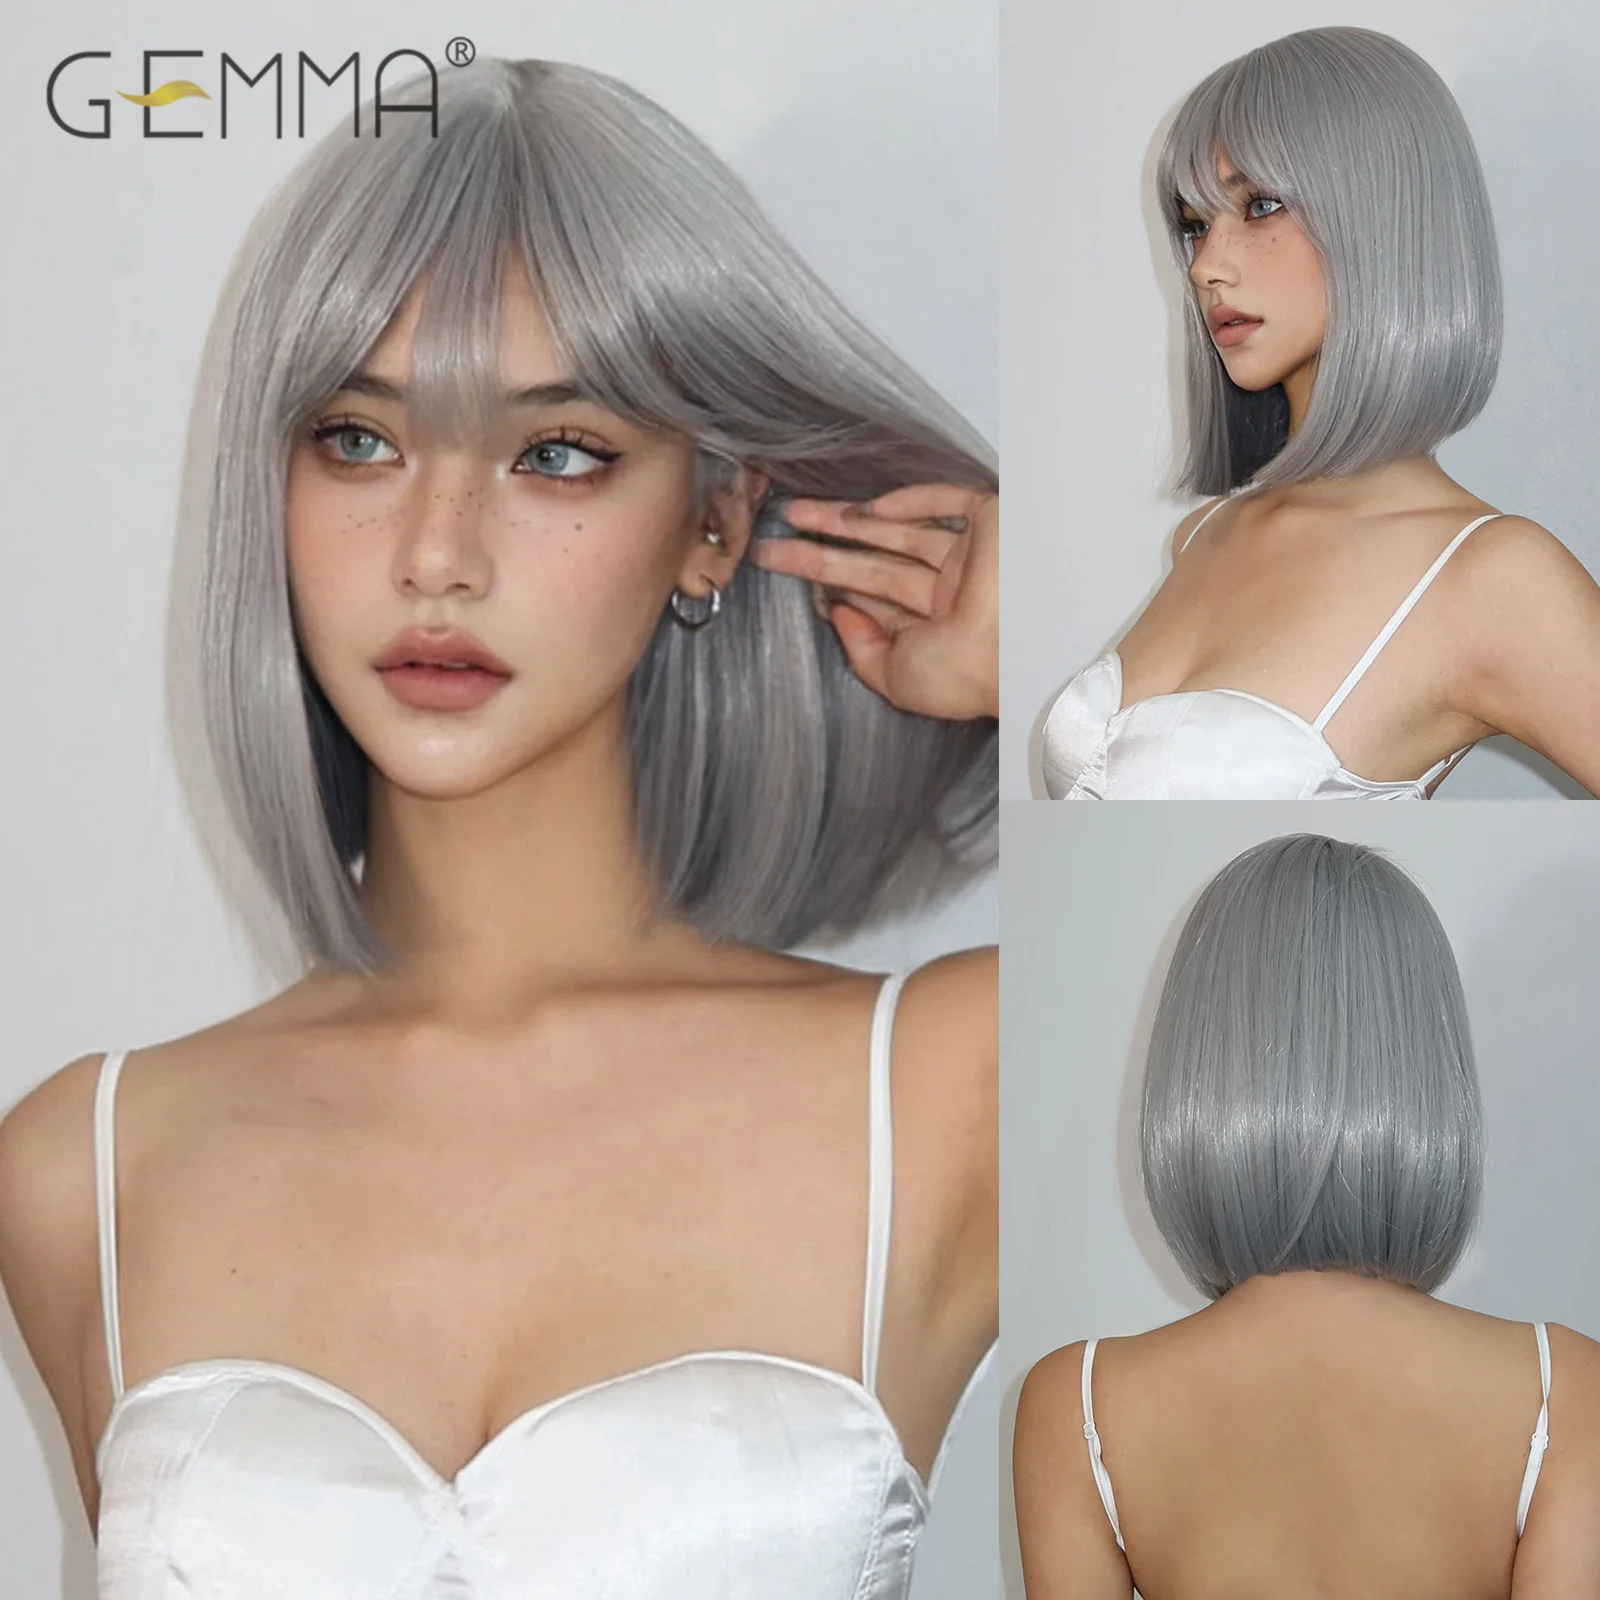 Silver Gray Short Straight Wig Synthetic Bob Wigs with Bangs for White Women Cosplay Daily Use Wig Natural Hair Heat Resistant synthetic straight hair wigs straight chemical fiber wigs for daily party cosplay wear wig 75cm black head wig for women